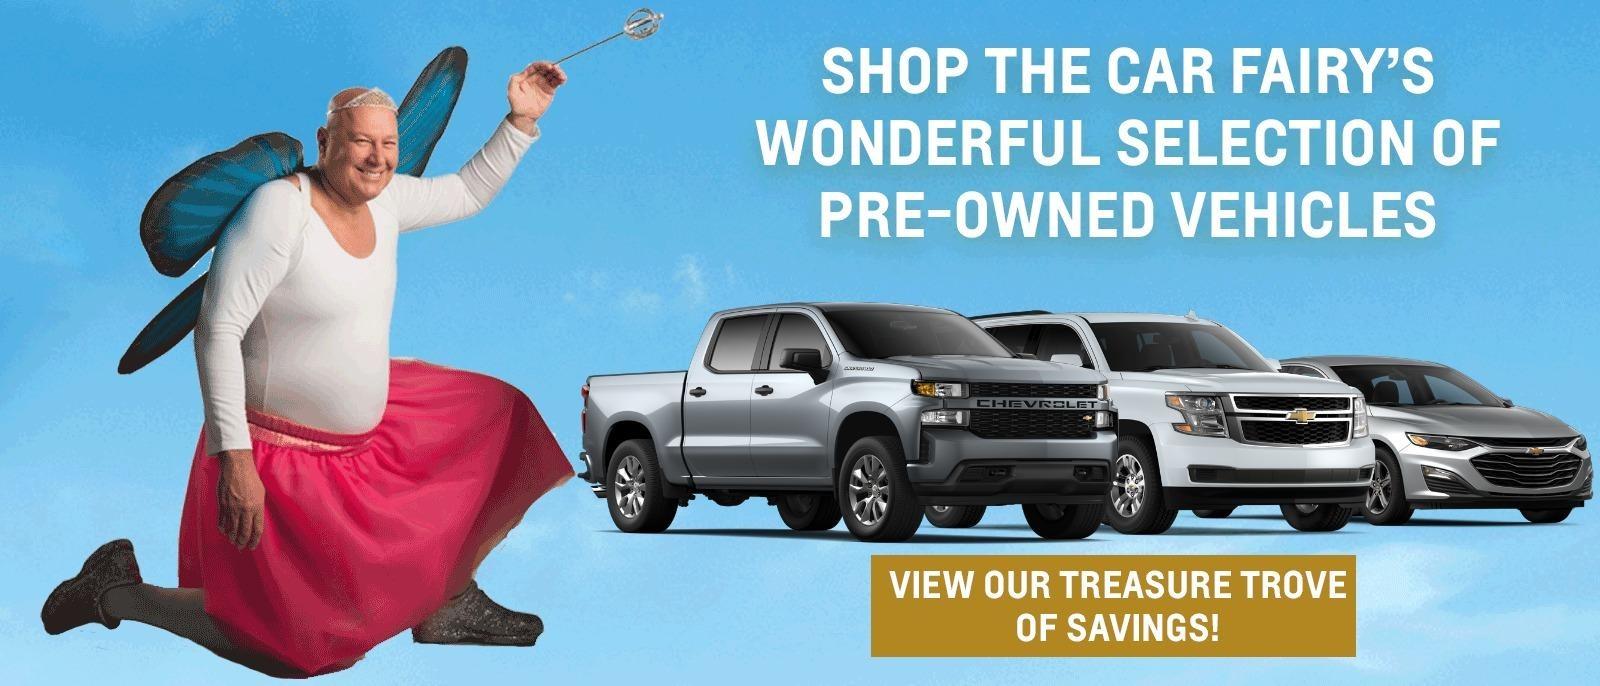 Shop the Car Fairy's Wonderful Selection of Pre-Owned Vehicles - View Our Treasure Trove of Savings